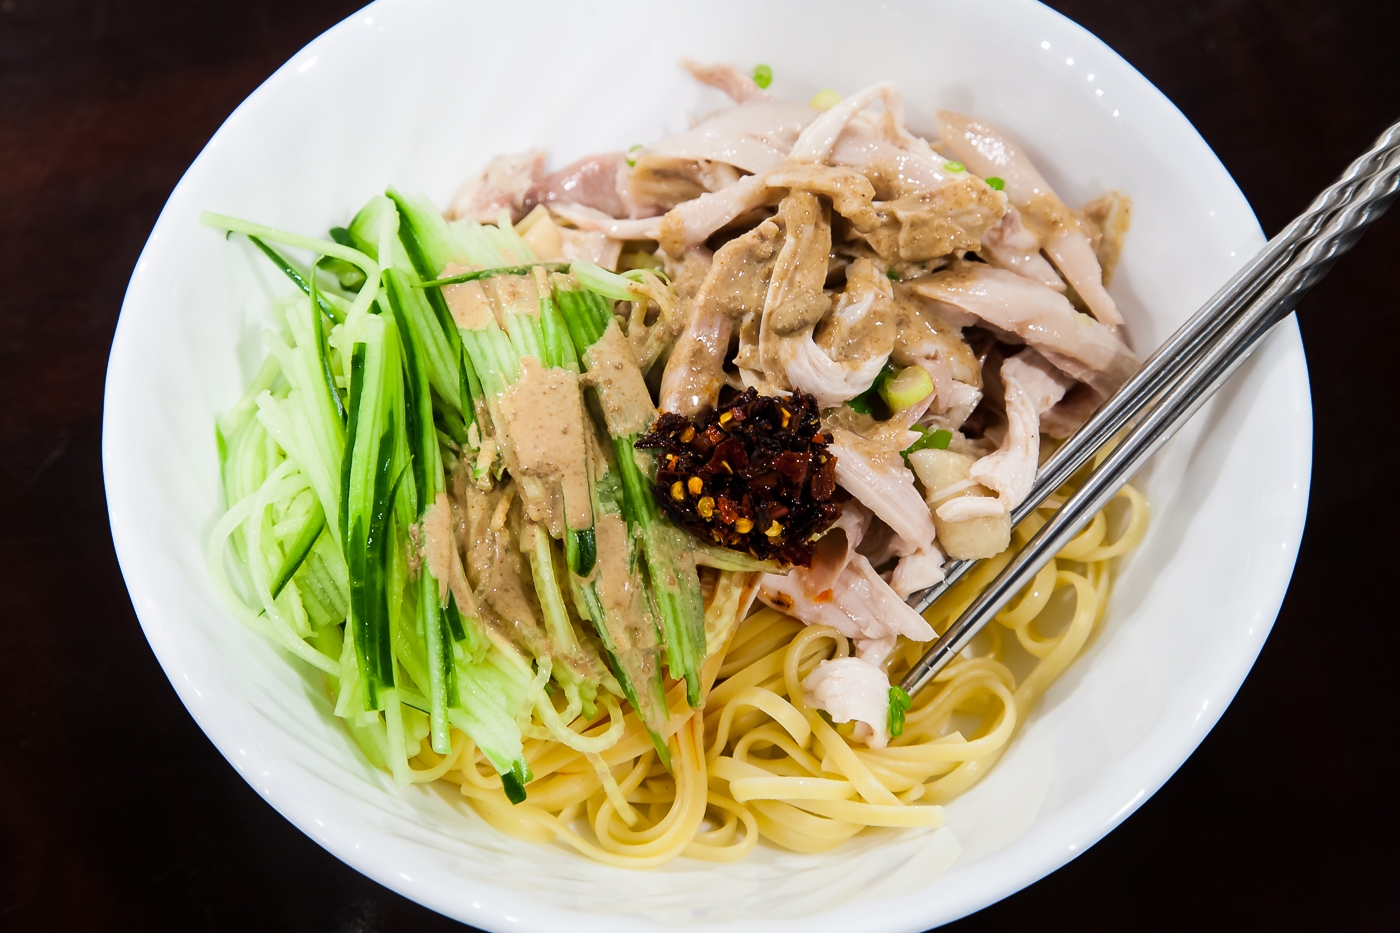 https://www.asiancookingmom.com/wp-content/uploads/2022/11/Chinese-Noodles-with-Shredded-Scallion-Chicken-20-of-21.jpg